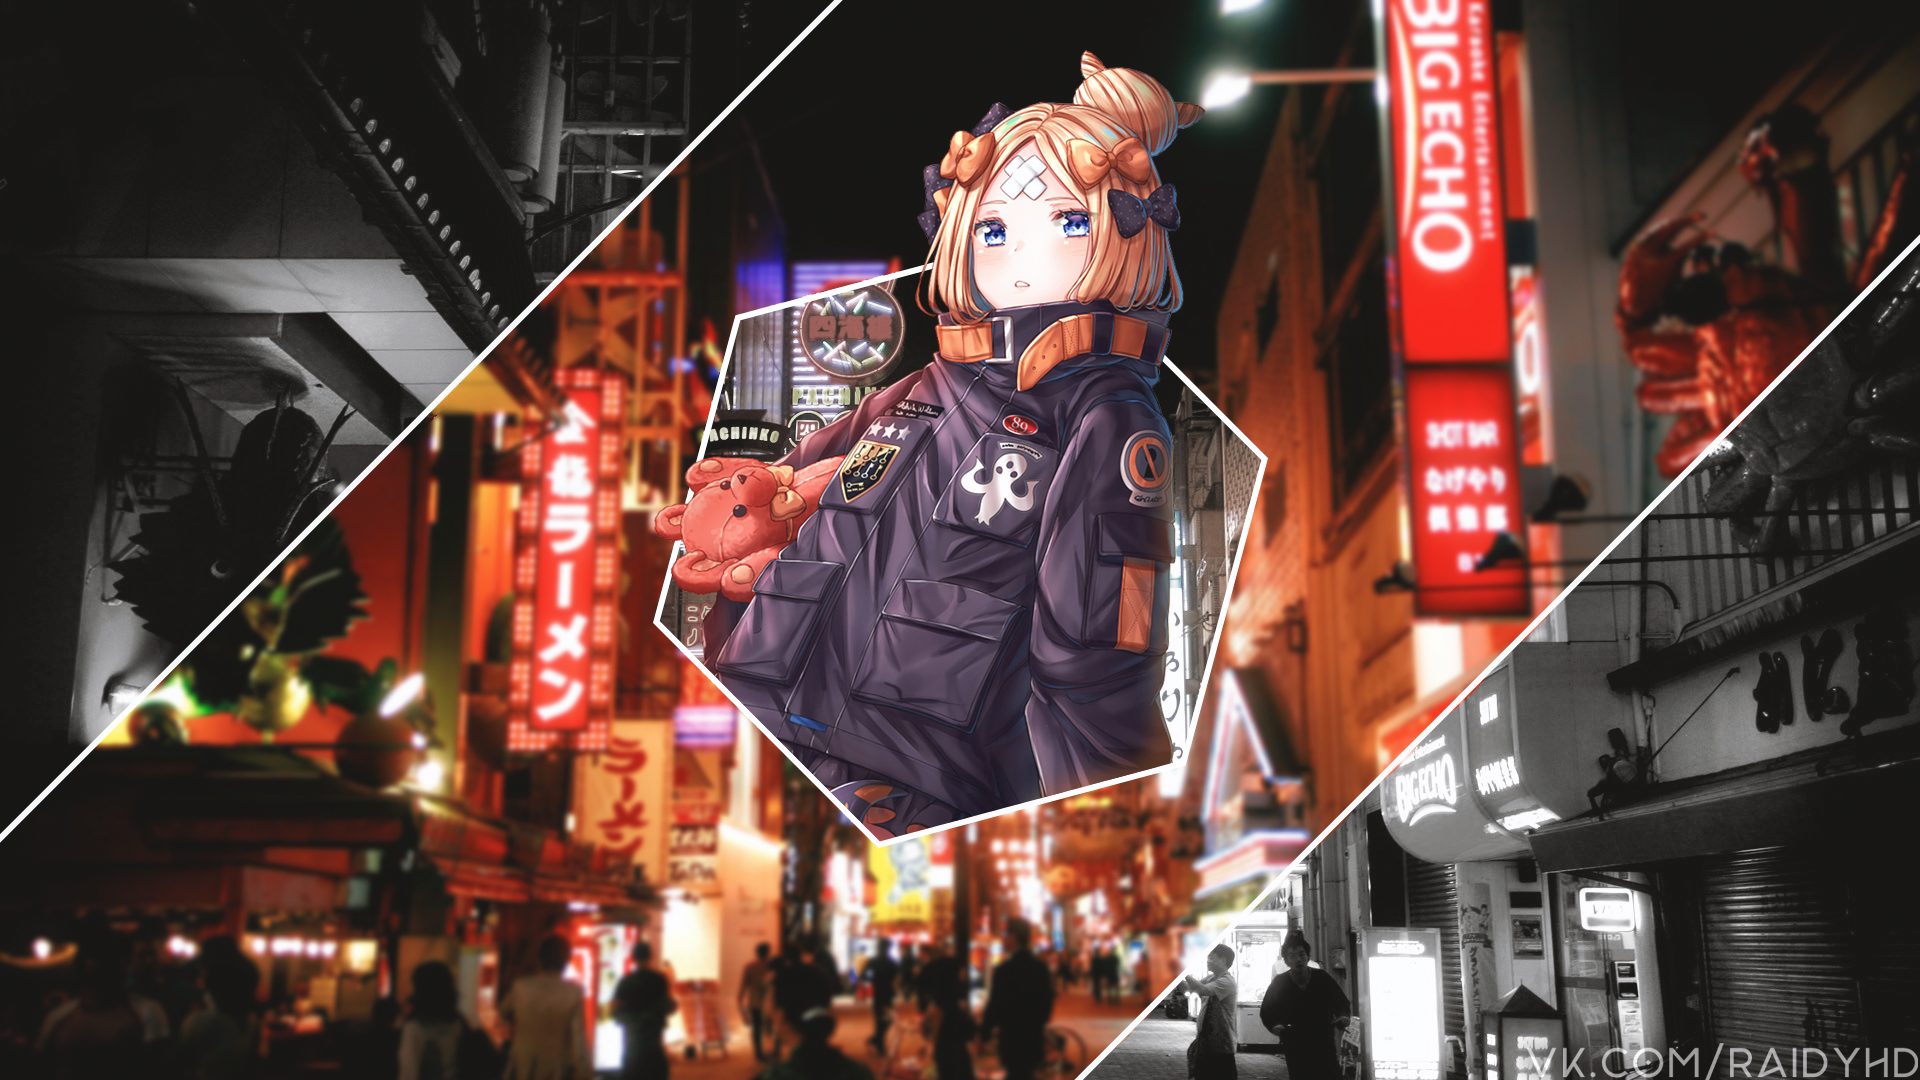 Anime 1920x1080 anime anime girls picture-in-picture Abigail Williams (Fate/Grand Order) Fate series Fate/Grand Order watermarked